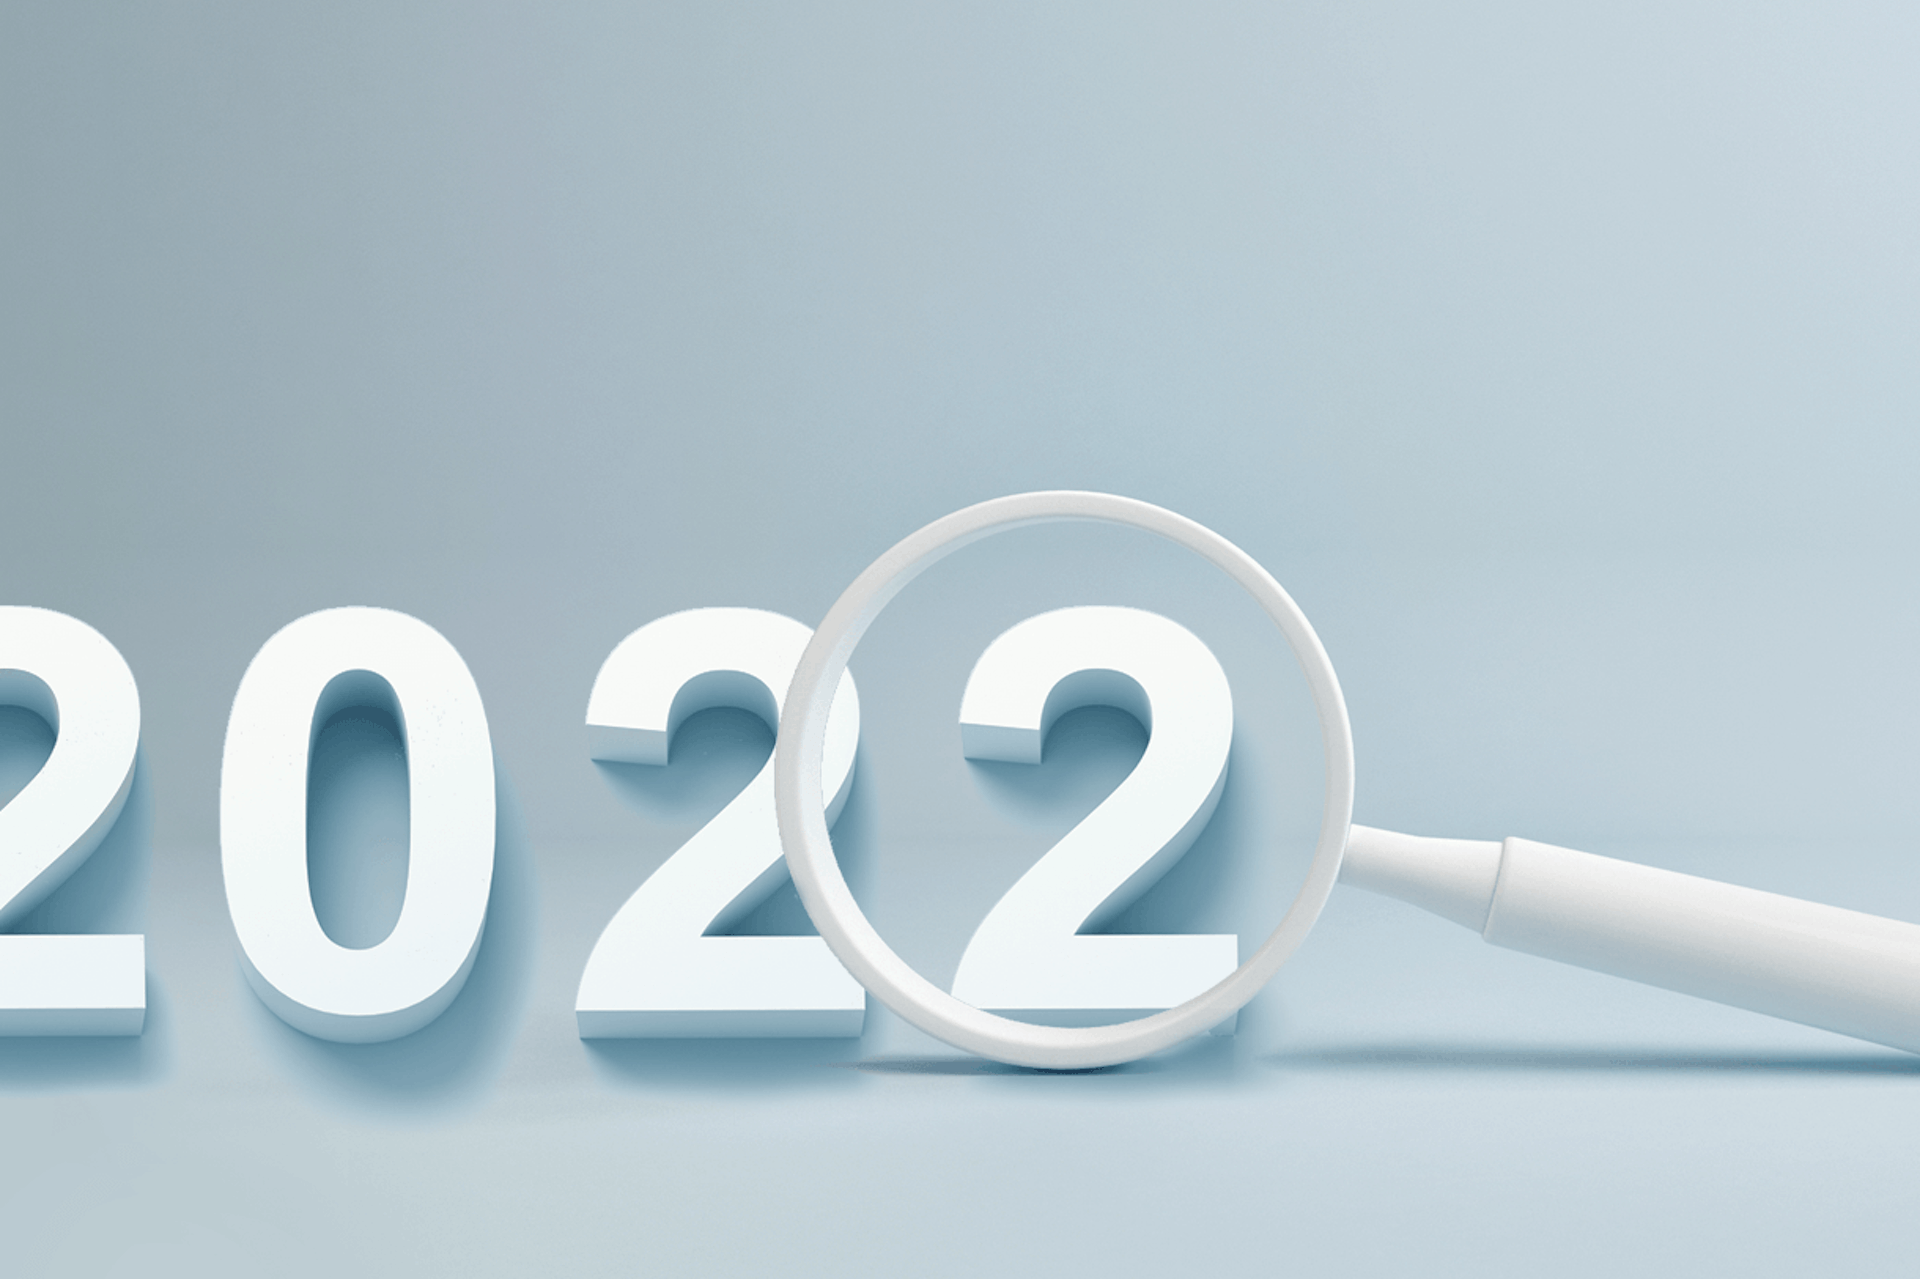 A magnifying glass hovers over the last 2 in 2022, for a blog about the top trends of the year as analyzed by Meltwater's social intelligence platform.